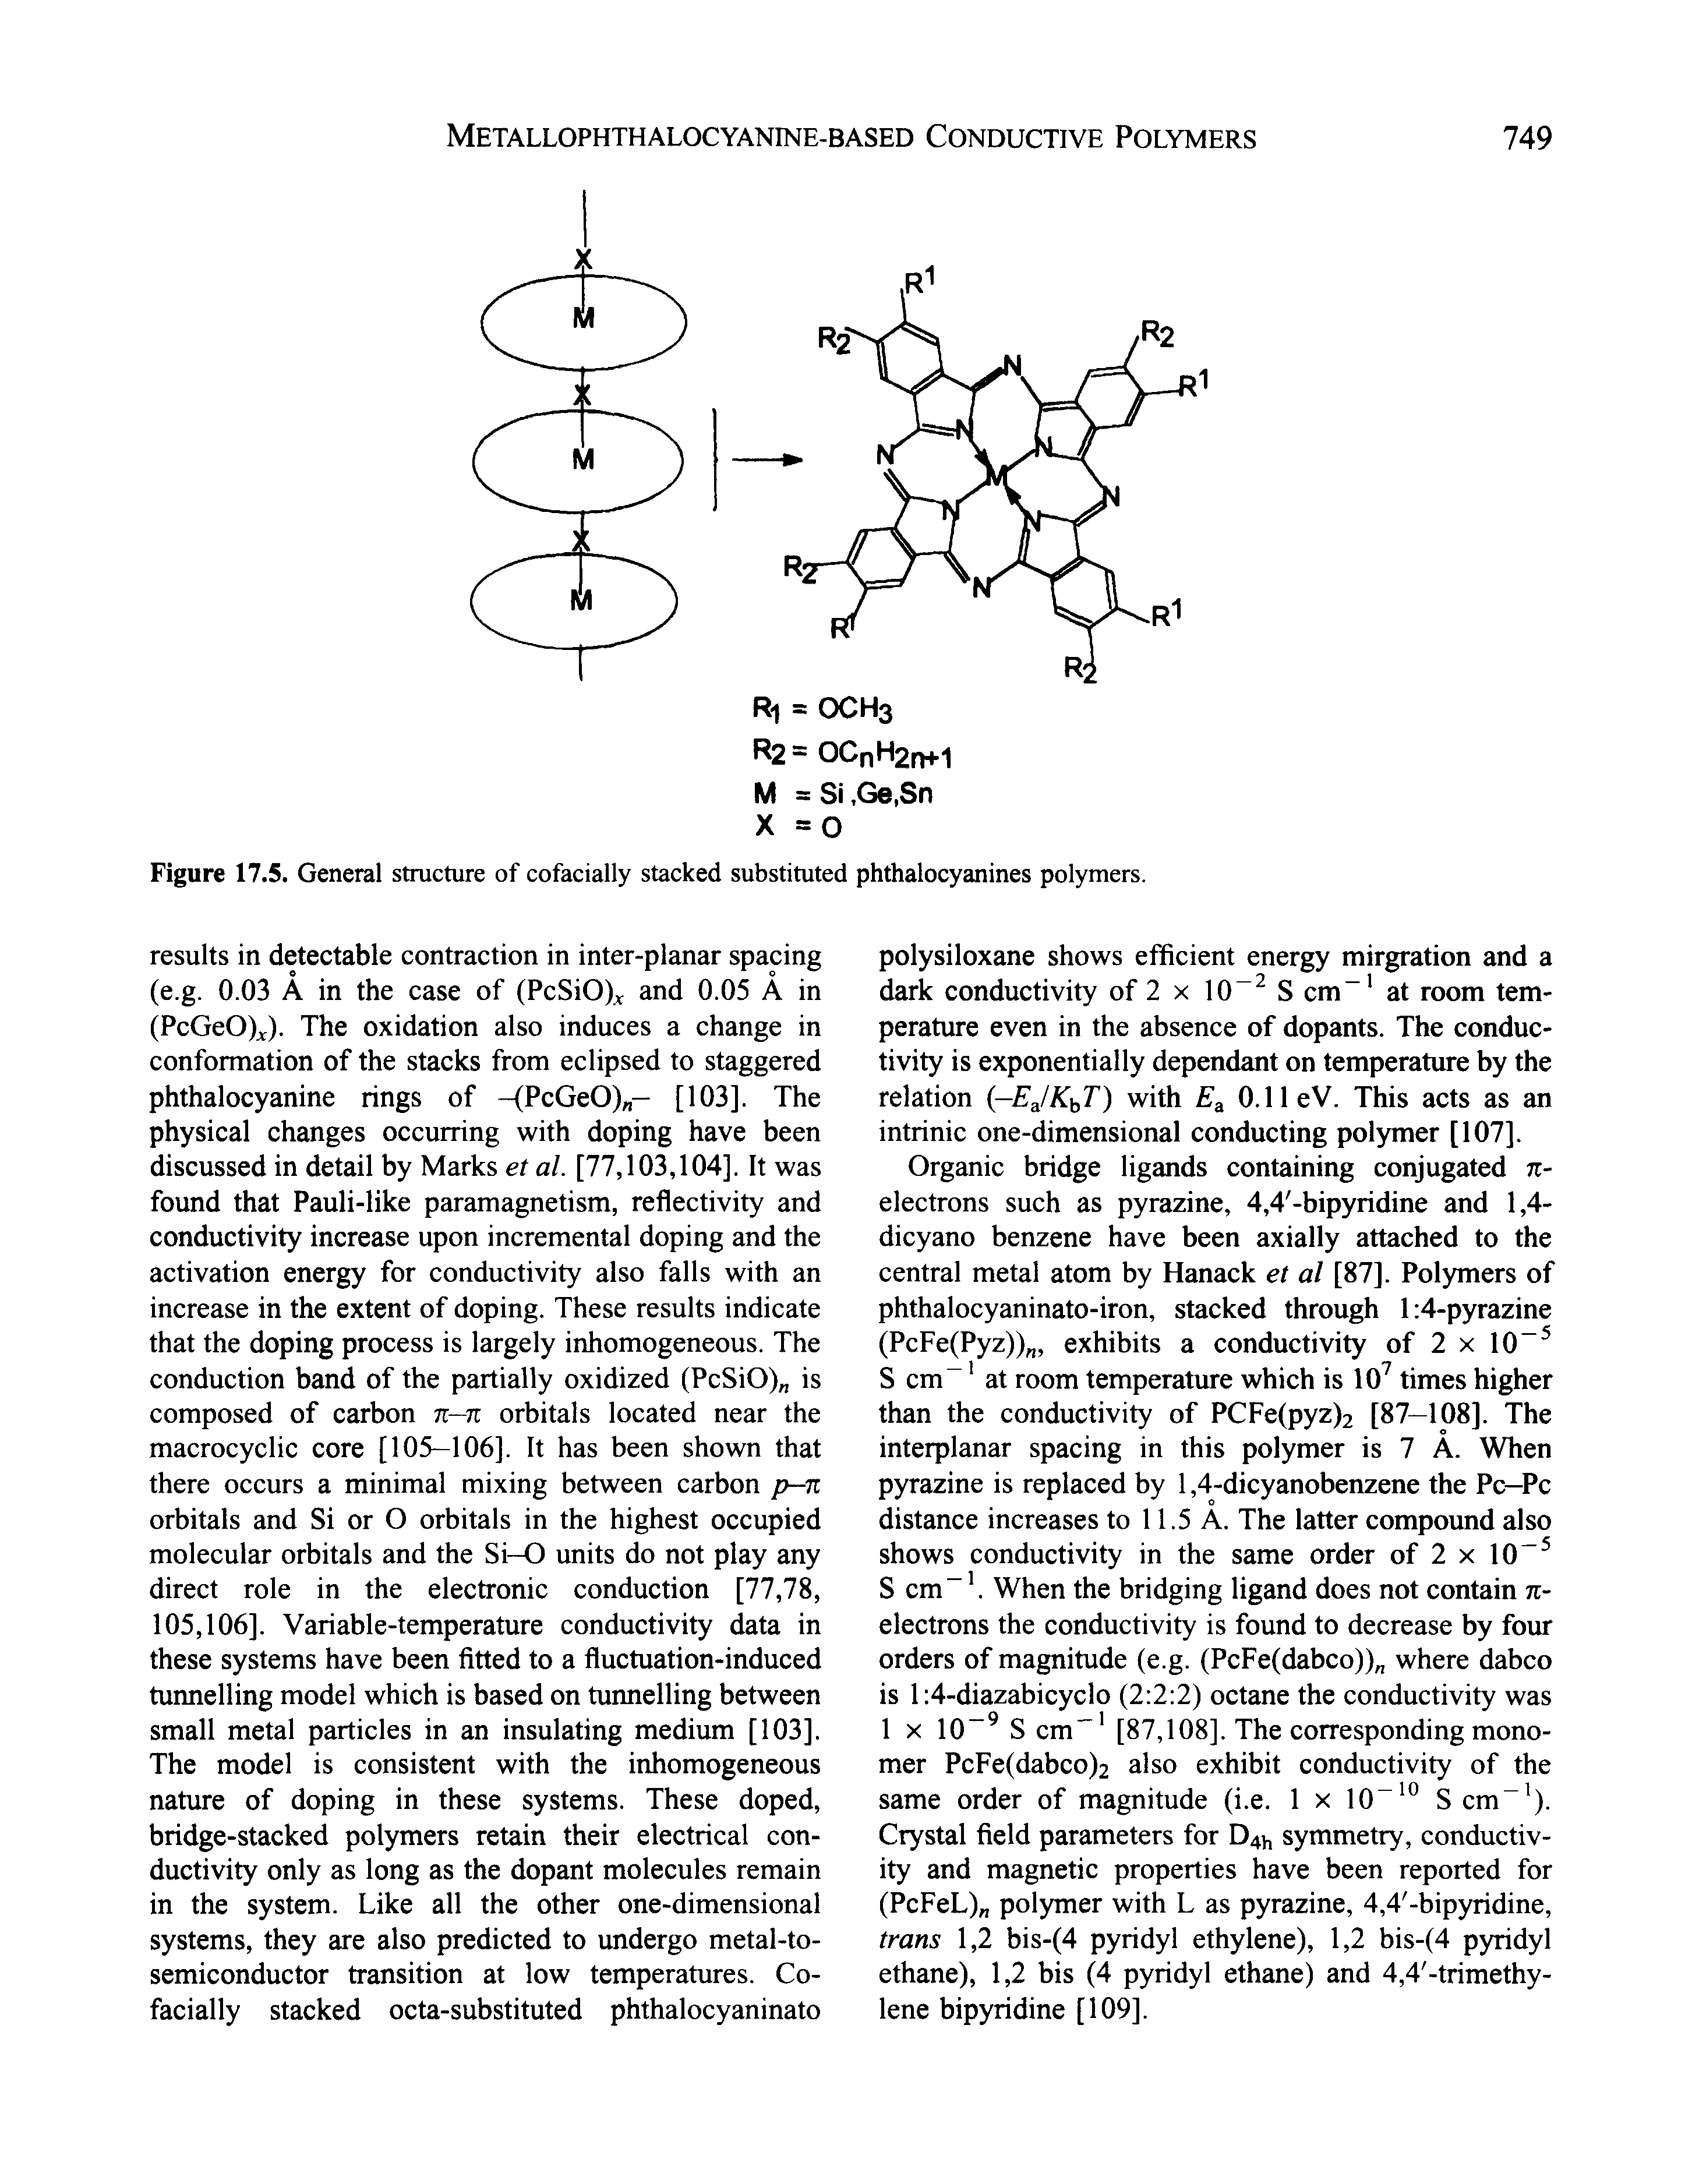 Figure 17.5. General structure of cofacially stacked substituted phthalocyanines polymers.